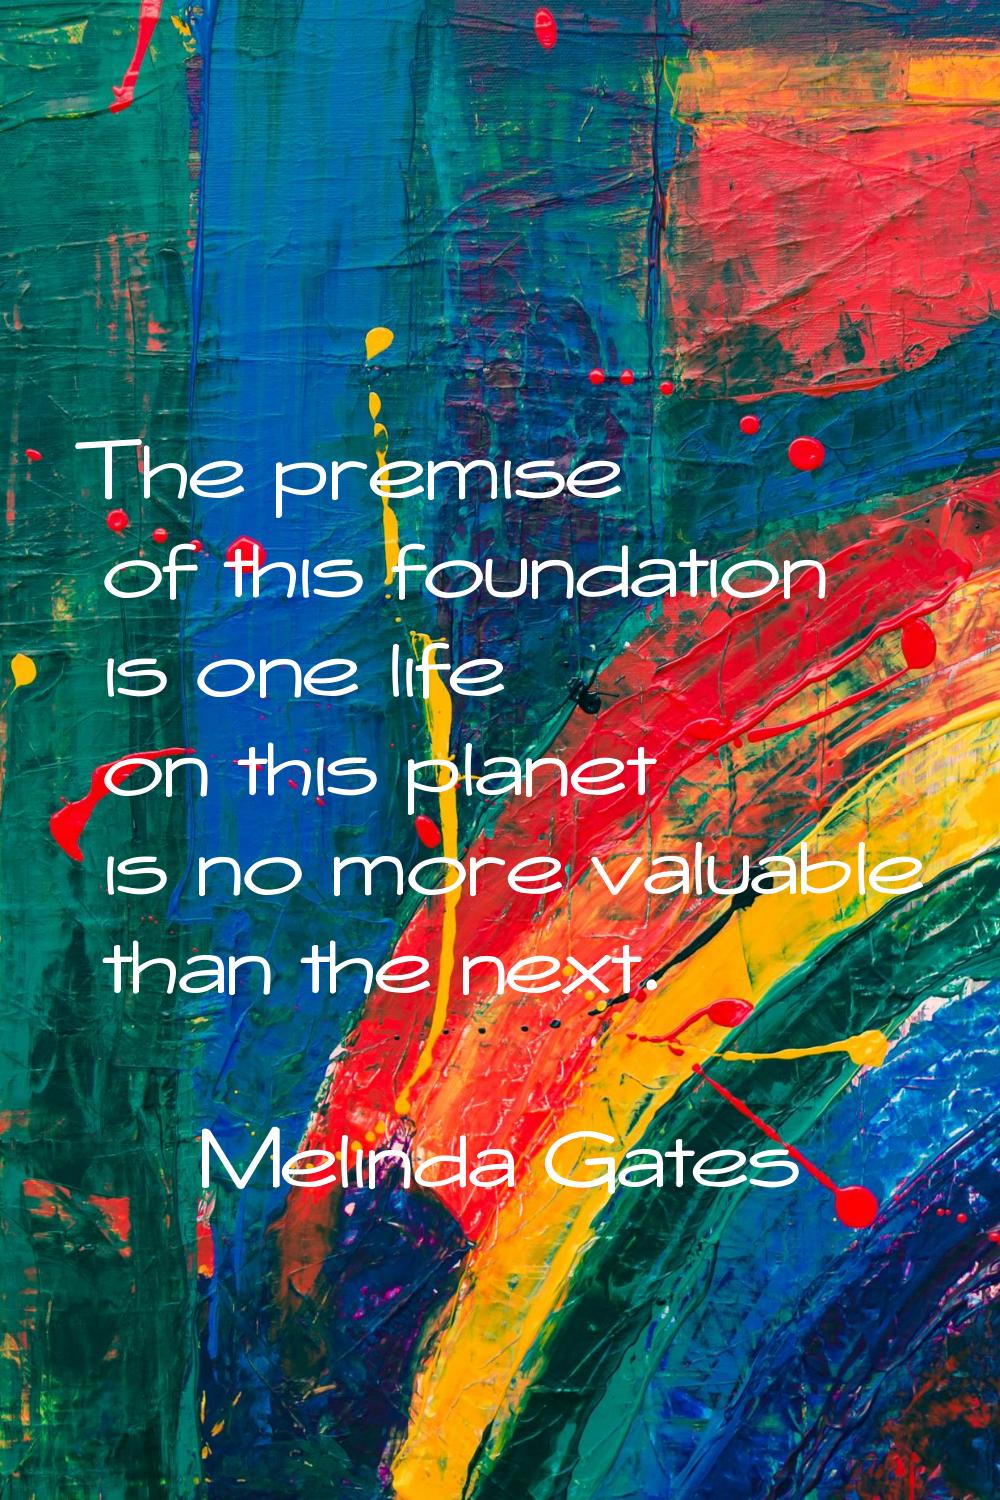 The premise of this foundation is one life on this planet is no more valuable than the next.